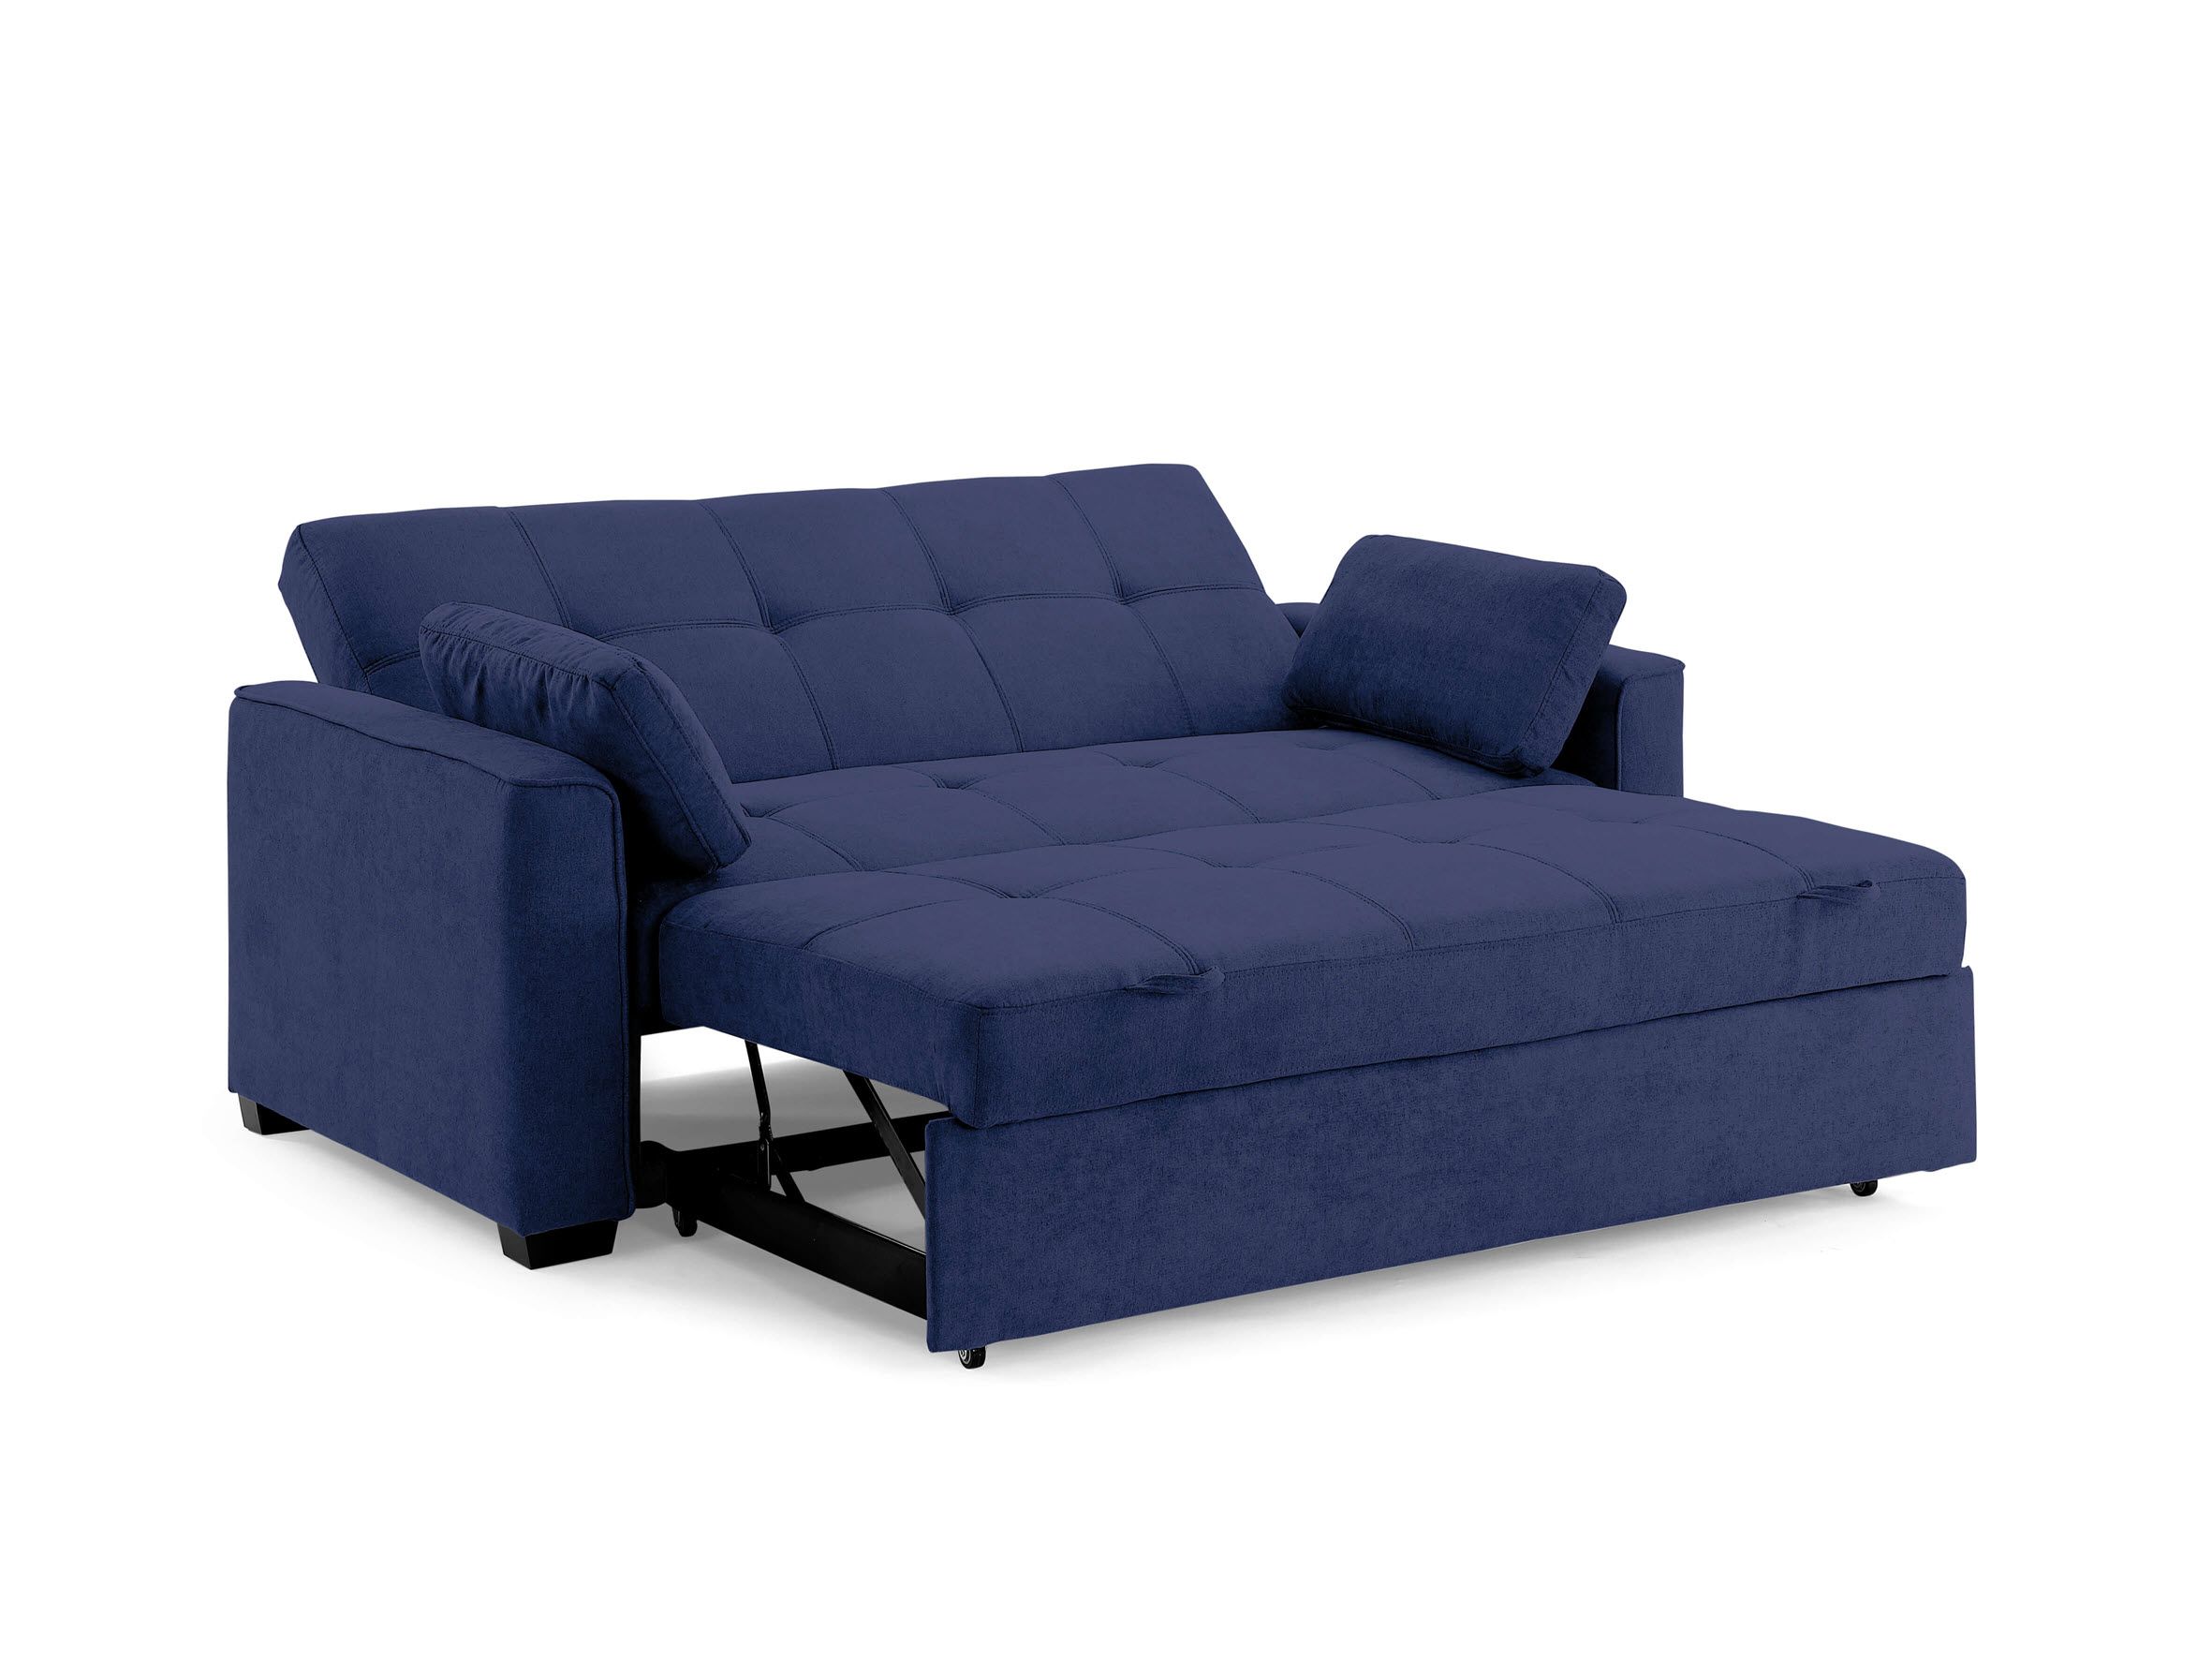 Cape Cod Nantucket Futon Sofa Sleeper Bed Navy Blue | Sleepworks Intended For Navy Sleeper Sofa Couches (View 5 of 15)